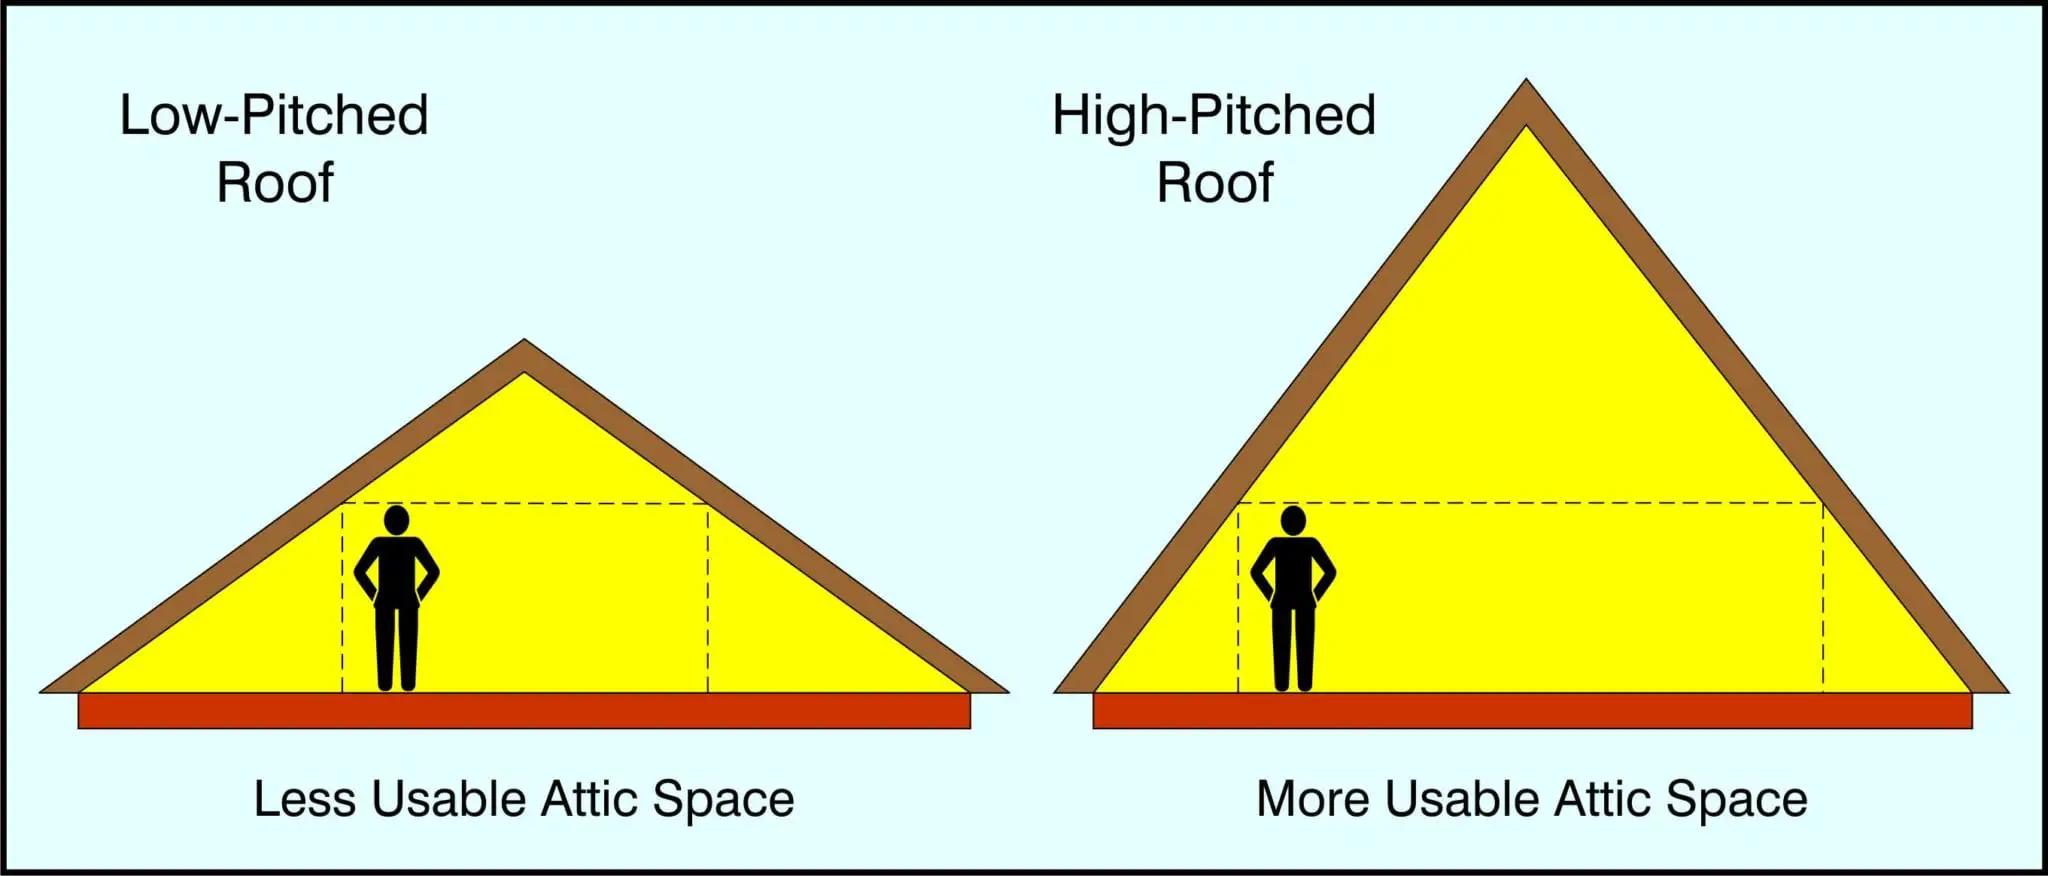 Hip Roof vs Gable Roof